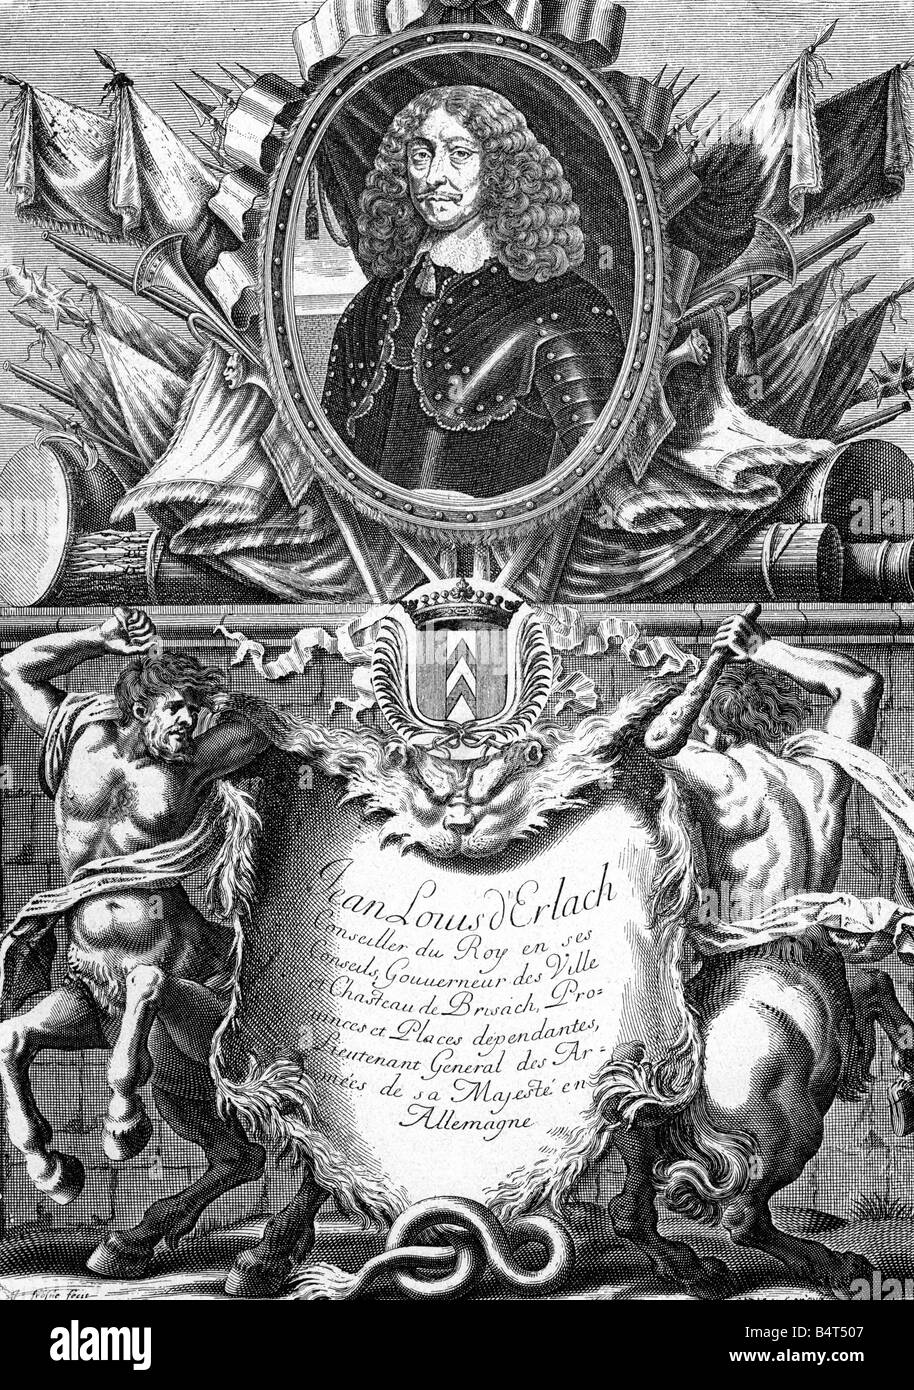 Erlach, Johann Ludwig, 1595 - 26.1.1650, Swiss general, portrait with allegorical border, wood engraving after copper engraving from the 17th century, Artist's Copyright has not to be cleared Stock Photo